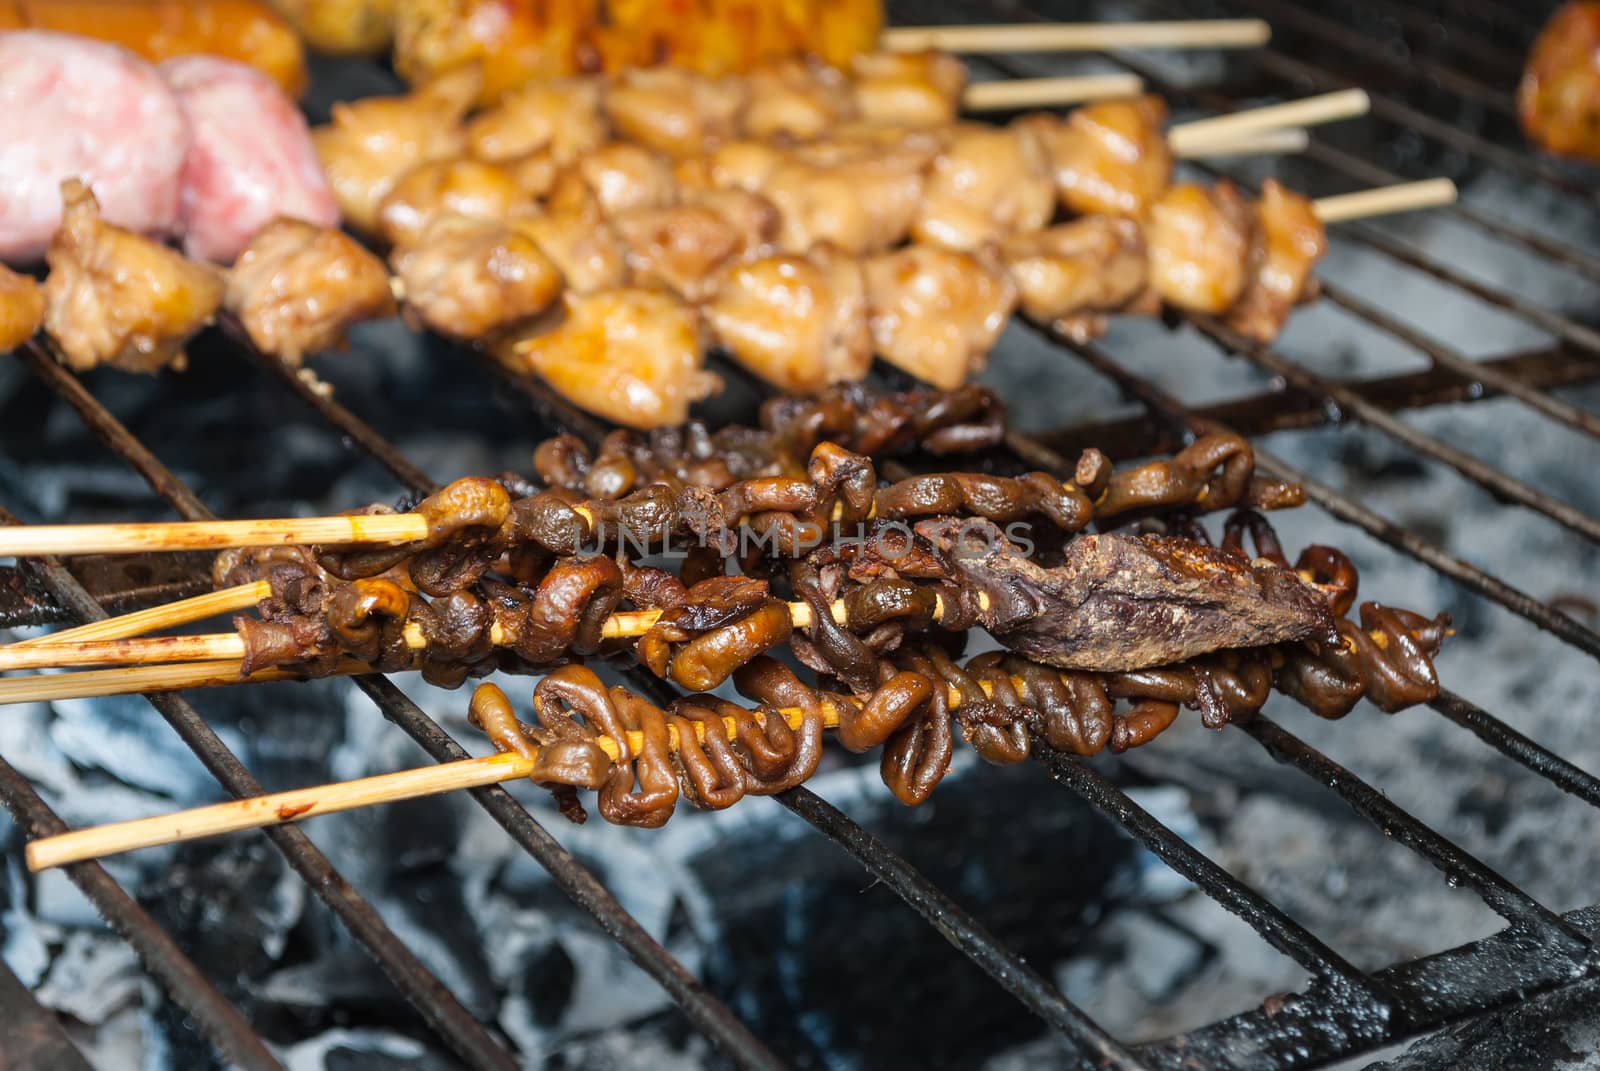 Grilled Chicken Entrails on Barbecue Grid.